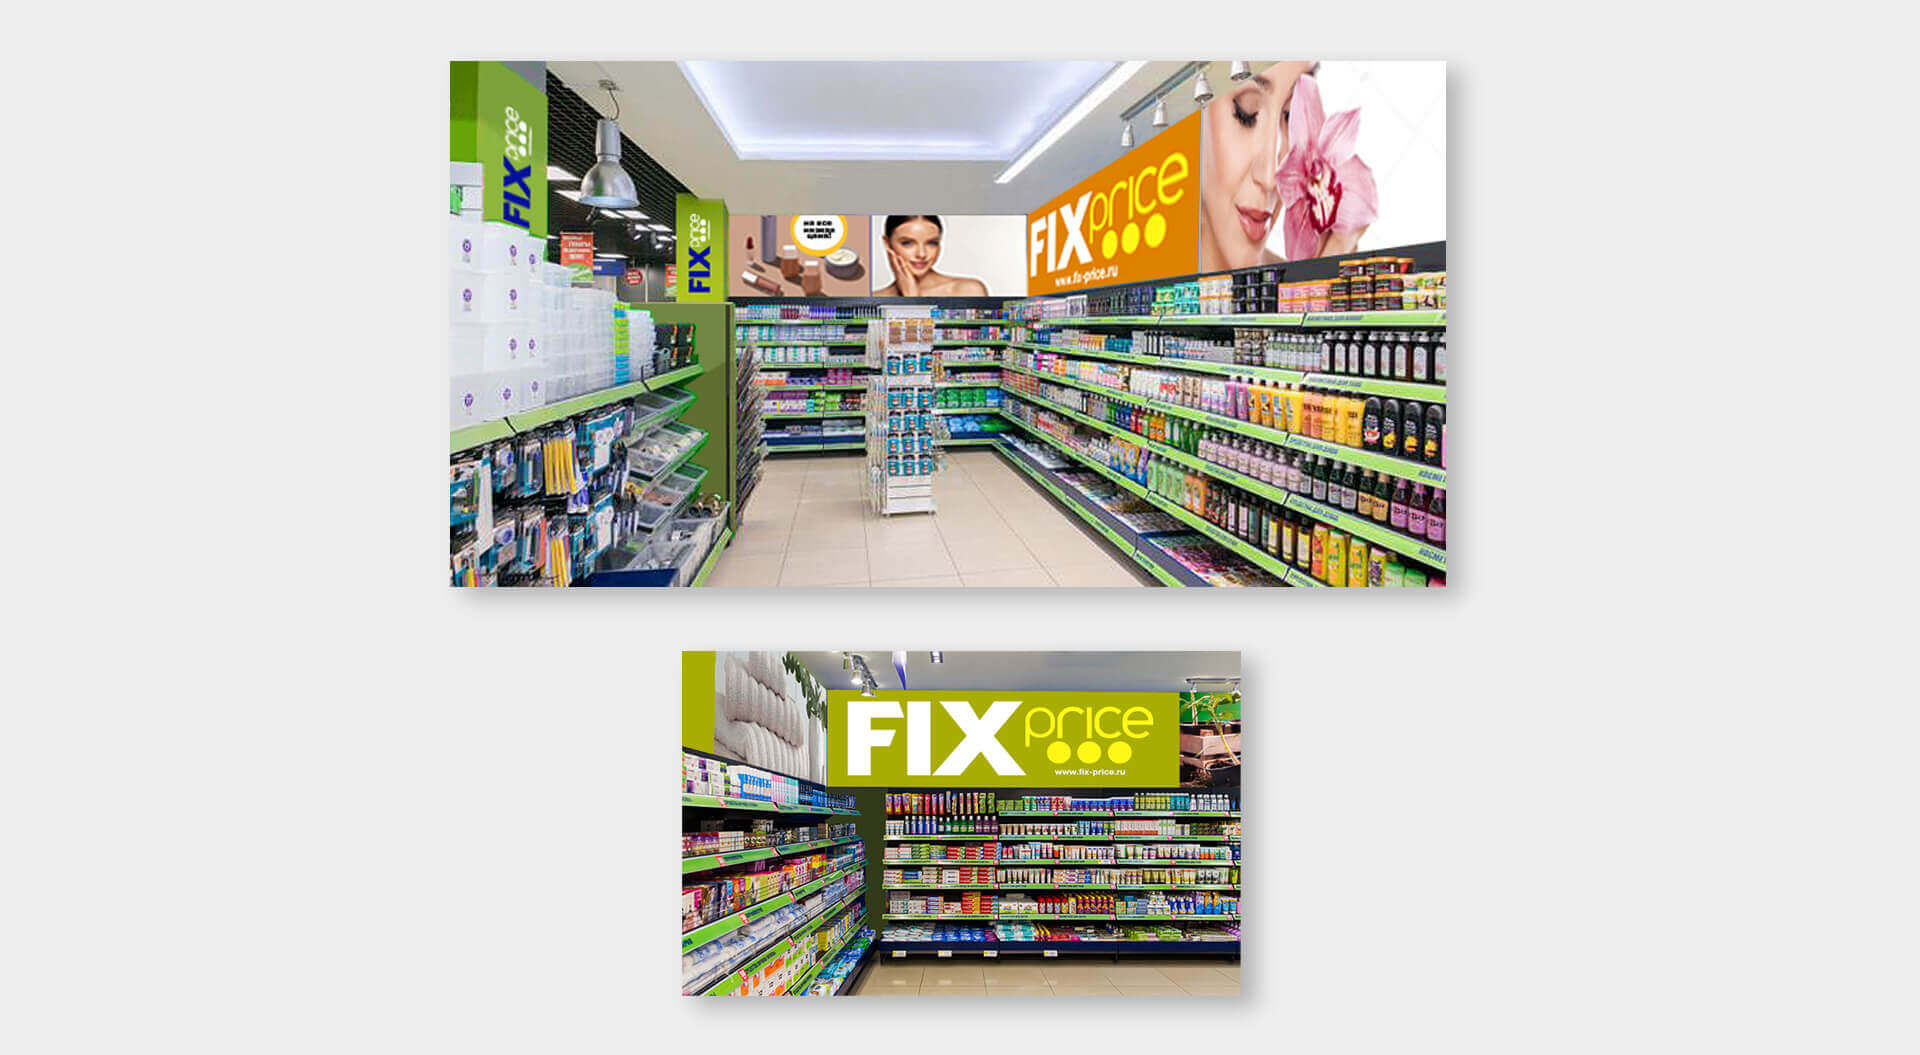 Fix Price Russia, Branding, Internal Department Signage Retail, Brand Identity, Store Interior Design, Graphic Communications - CampbellRigg Agency